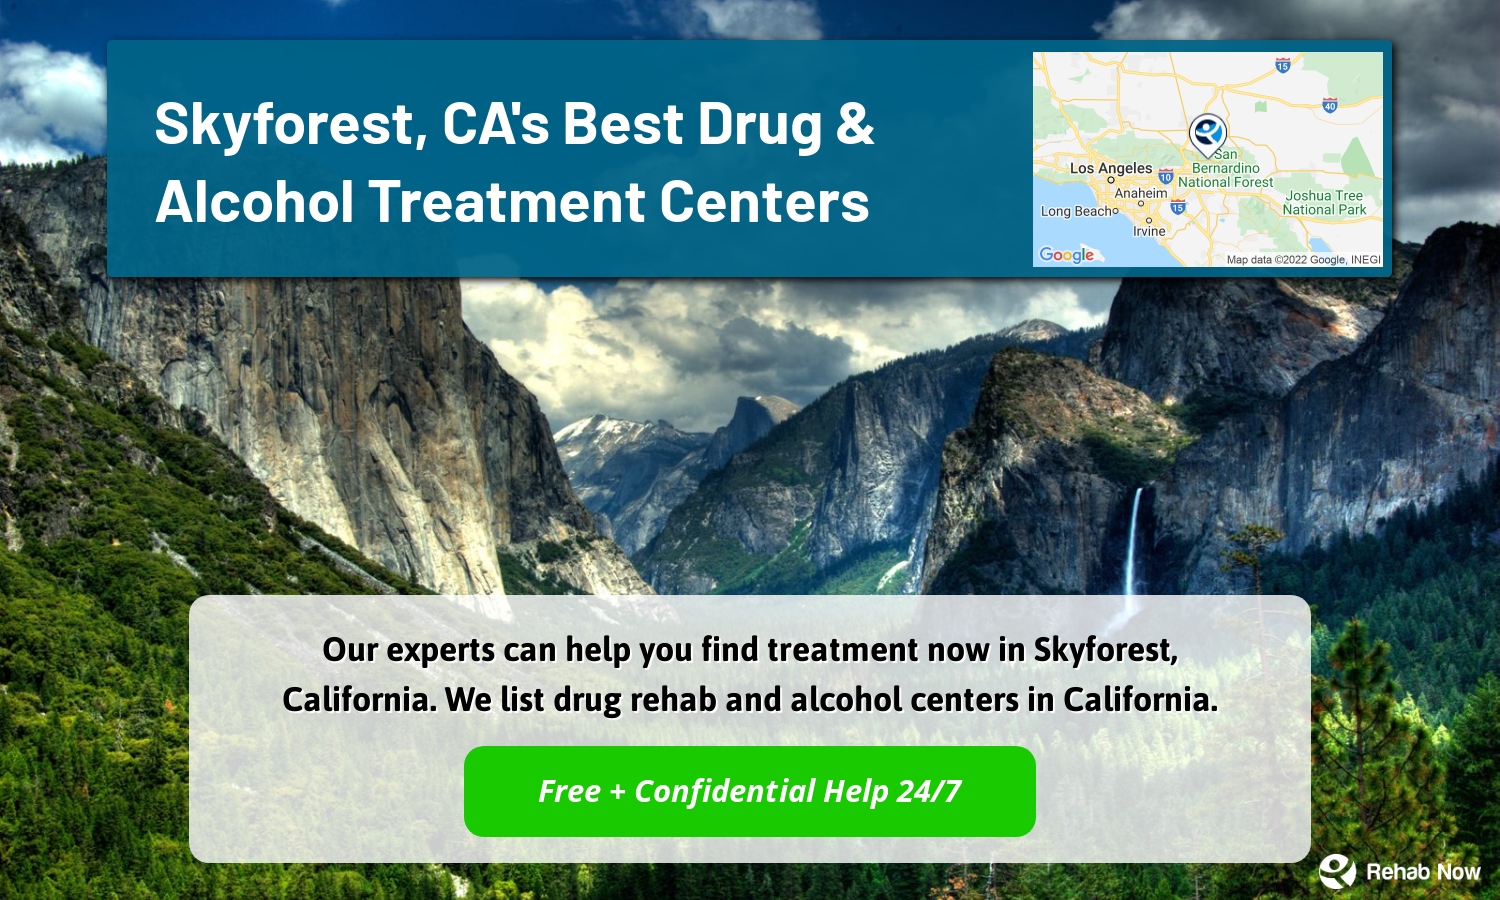 Our experts can help you find treatment now in Skyforest, California. We list drug rehab and alcohol centers in California.